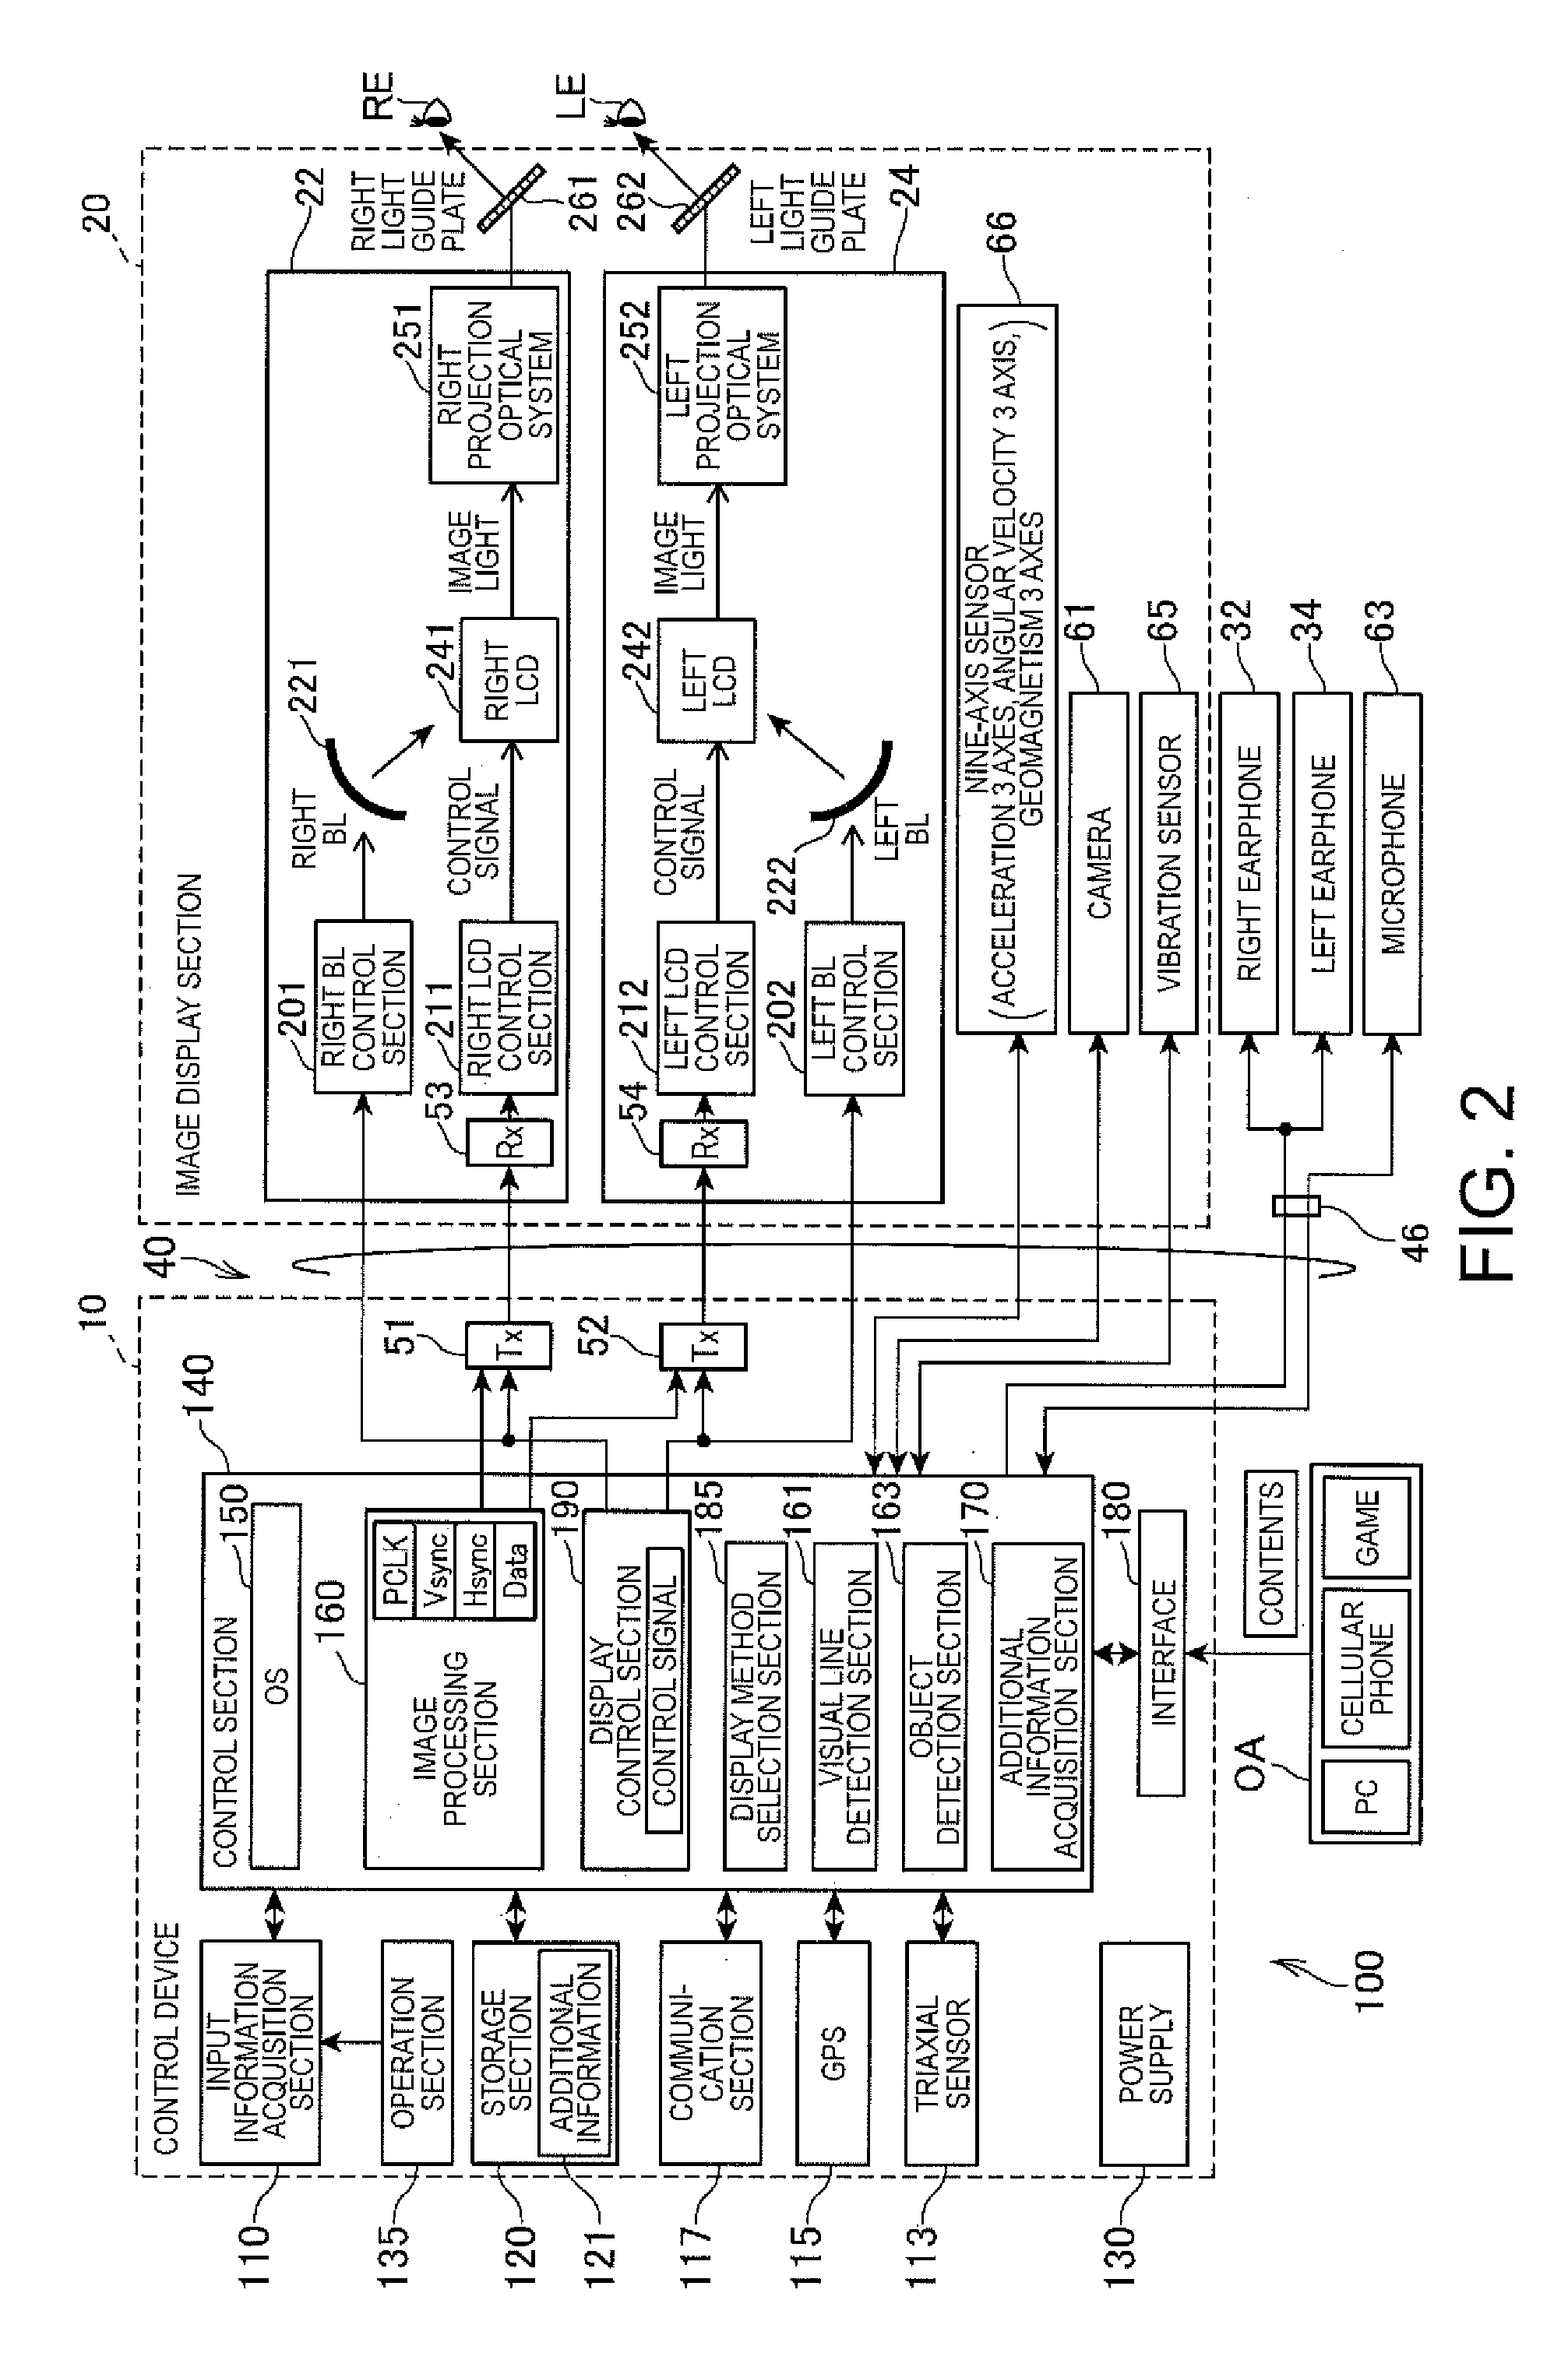 Display device, method of controlling display device, and program